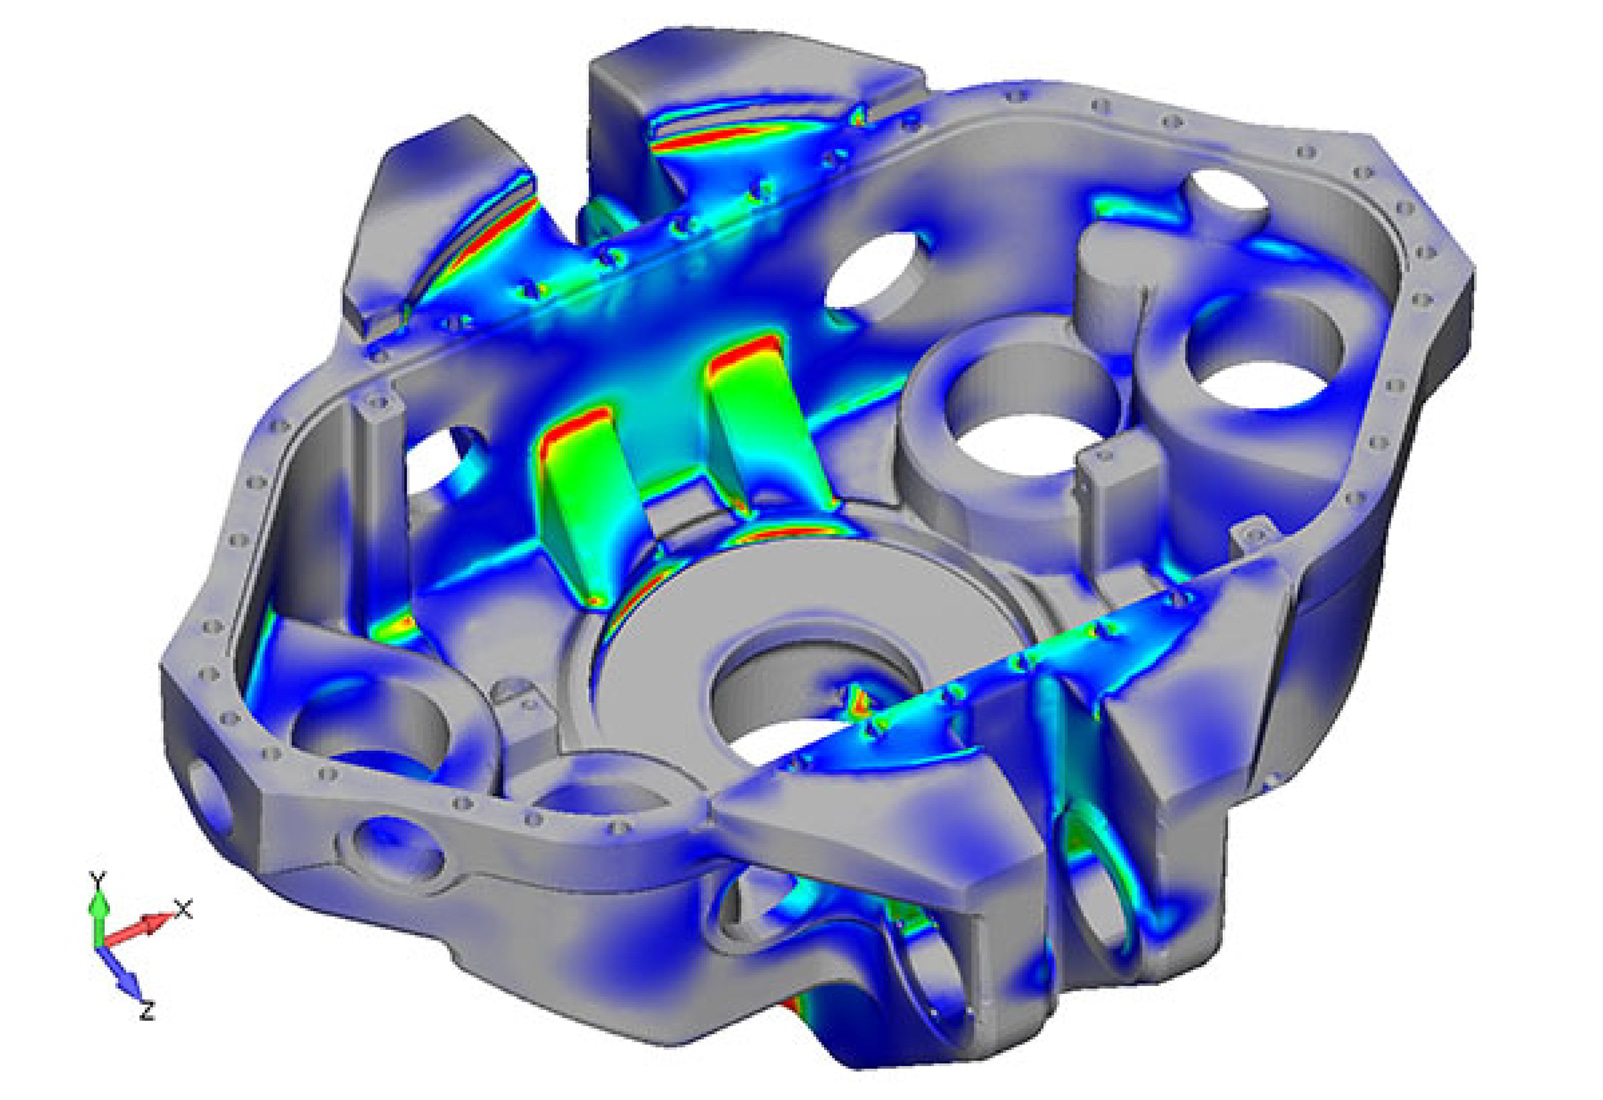 Stress results for FEA model of 1,000 short ton top drive - FEA Consulting Engineers